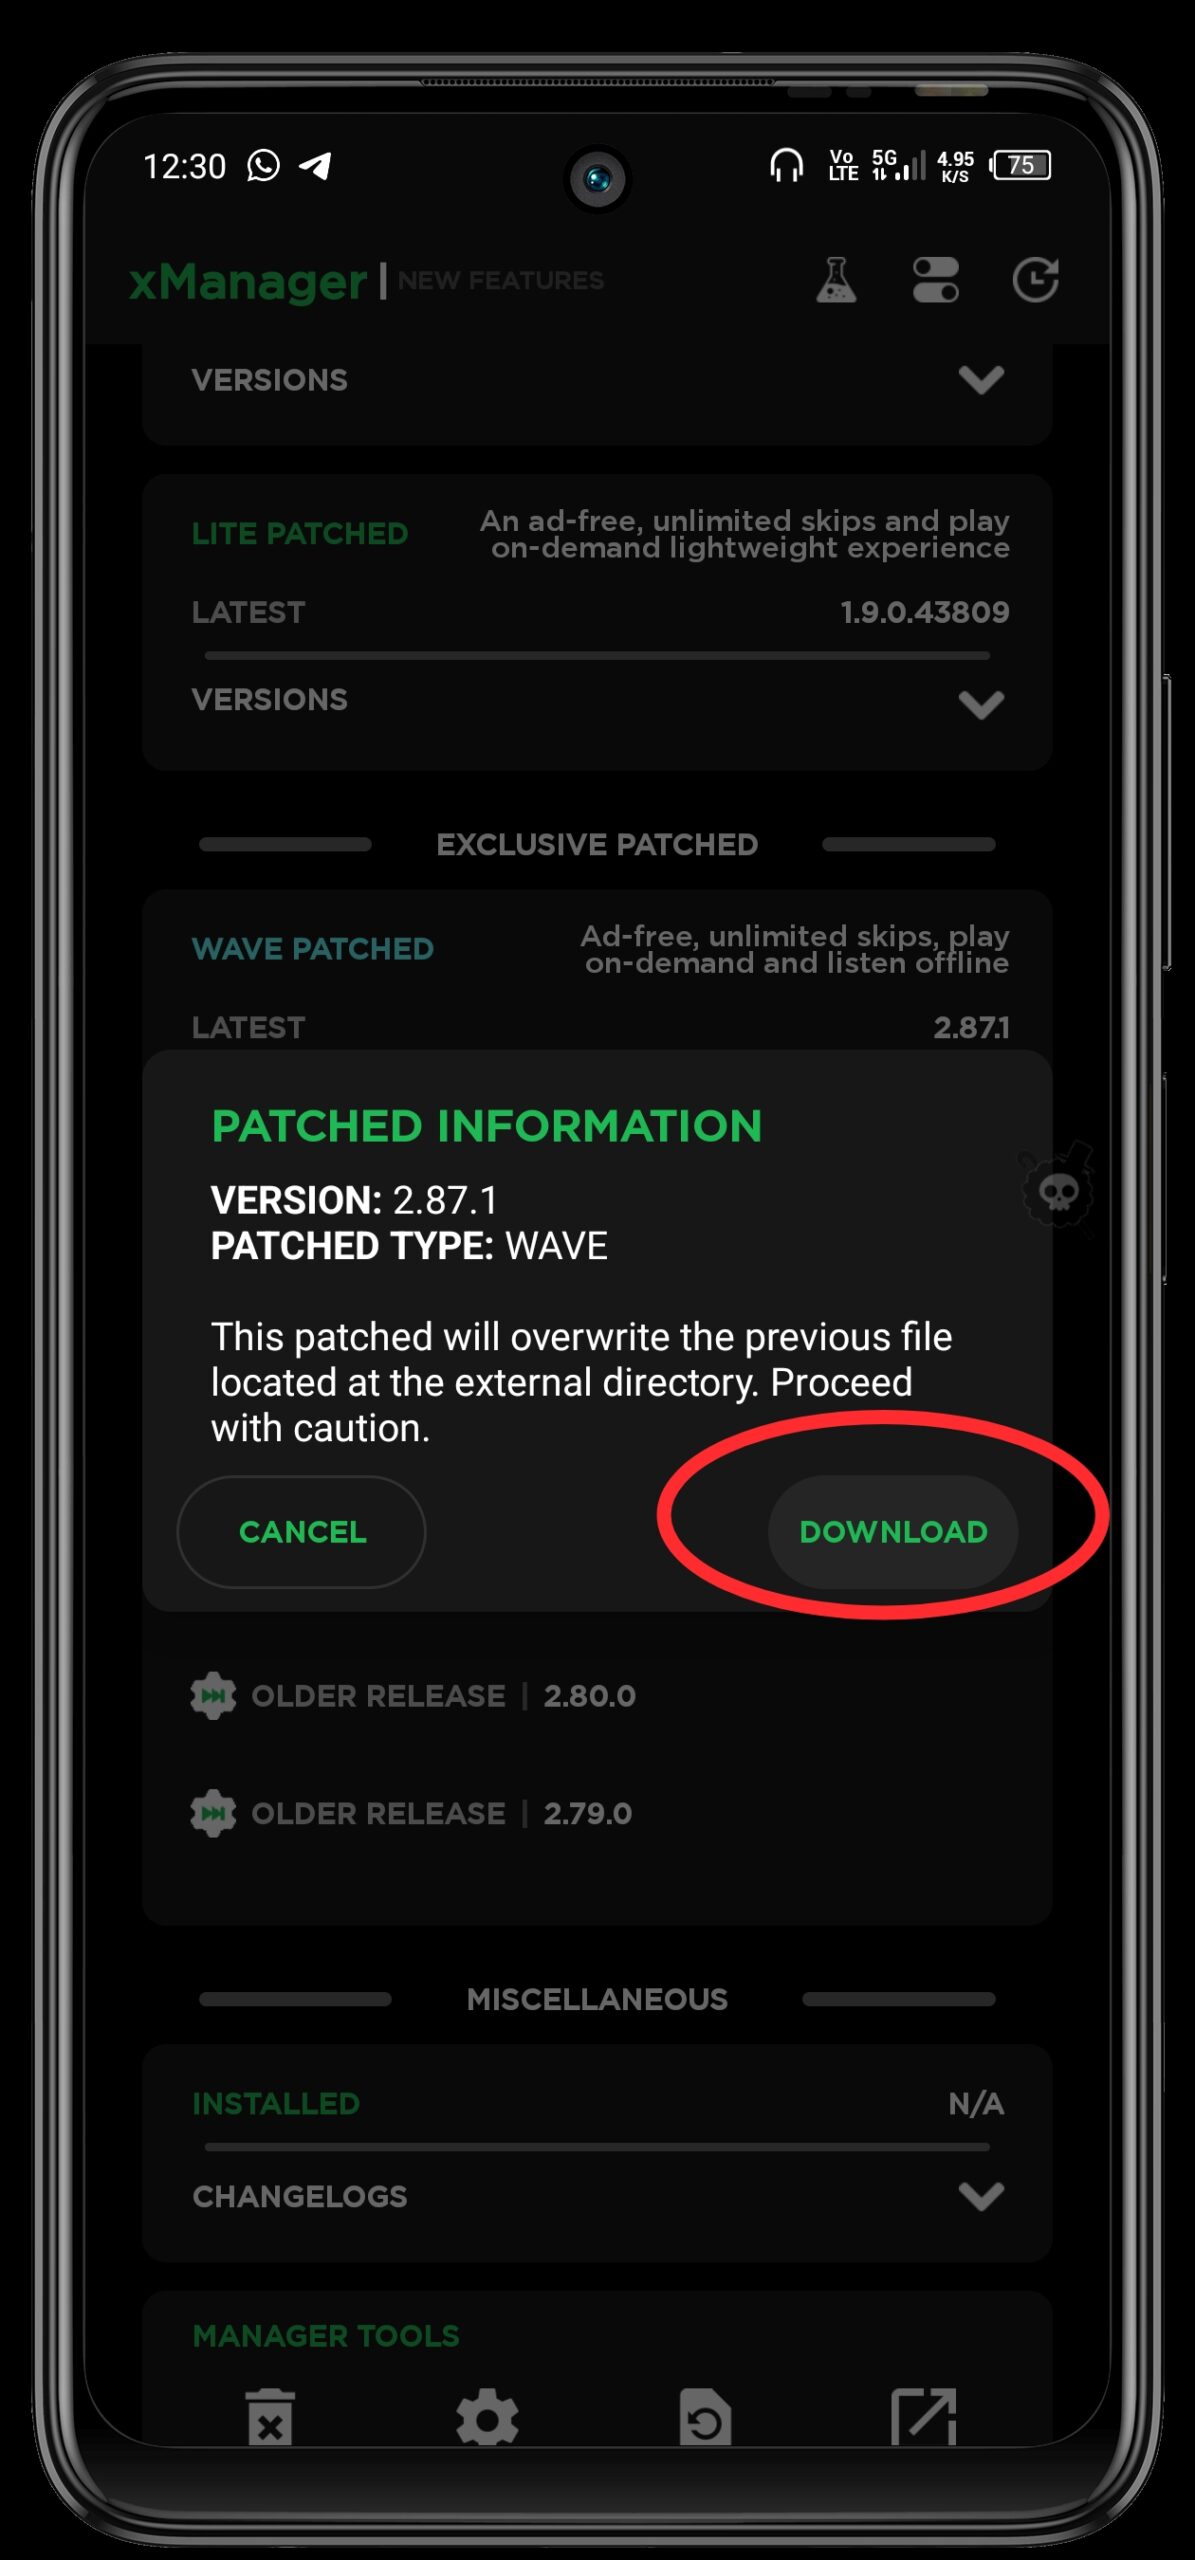 Install Latest Spotify Wav Patch on Android using xManager